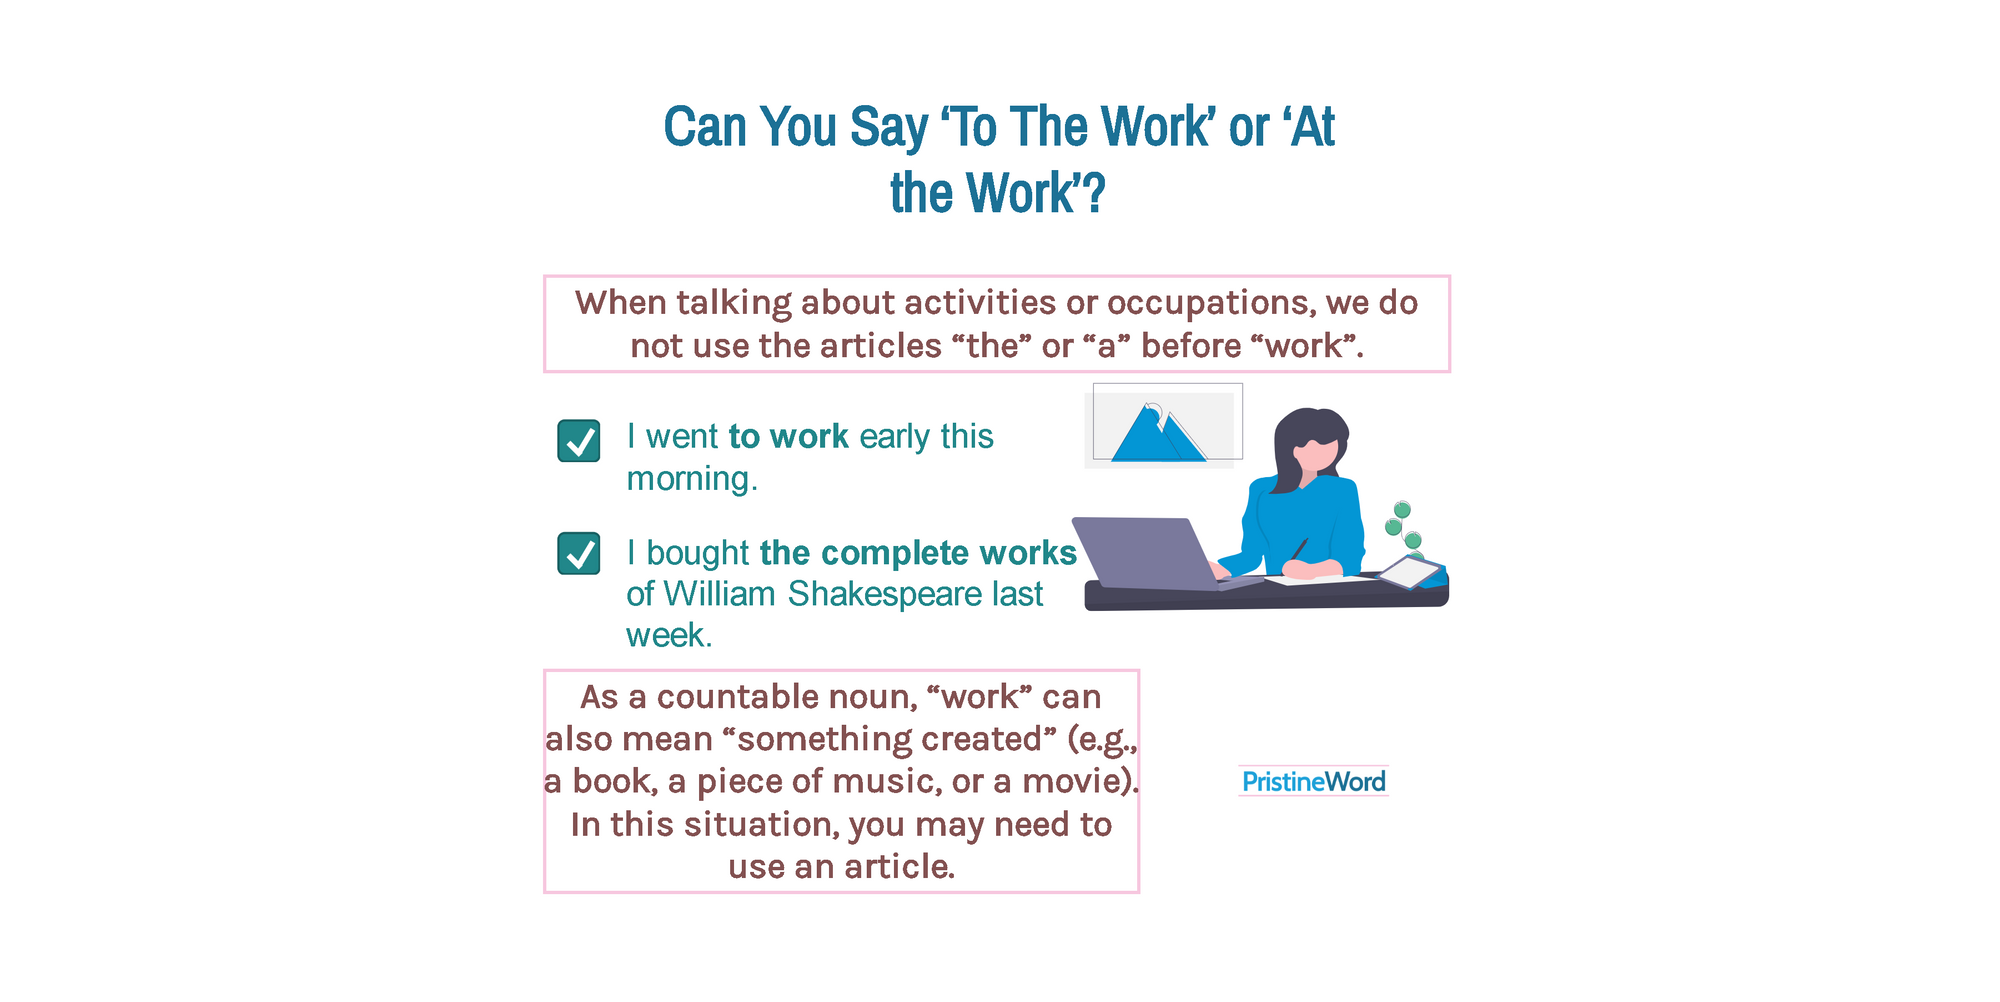 Can You Say ‘To The Work’ or ‘At the Work’?